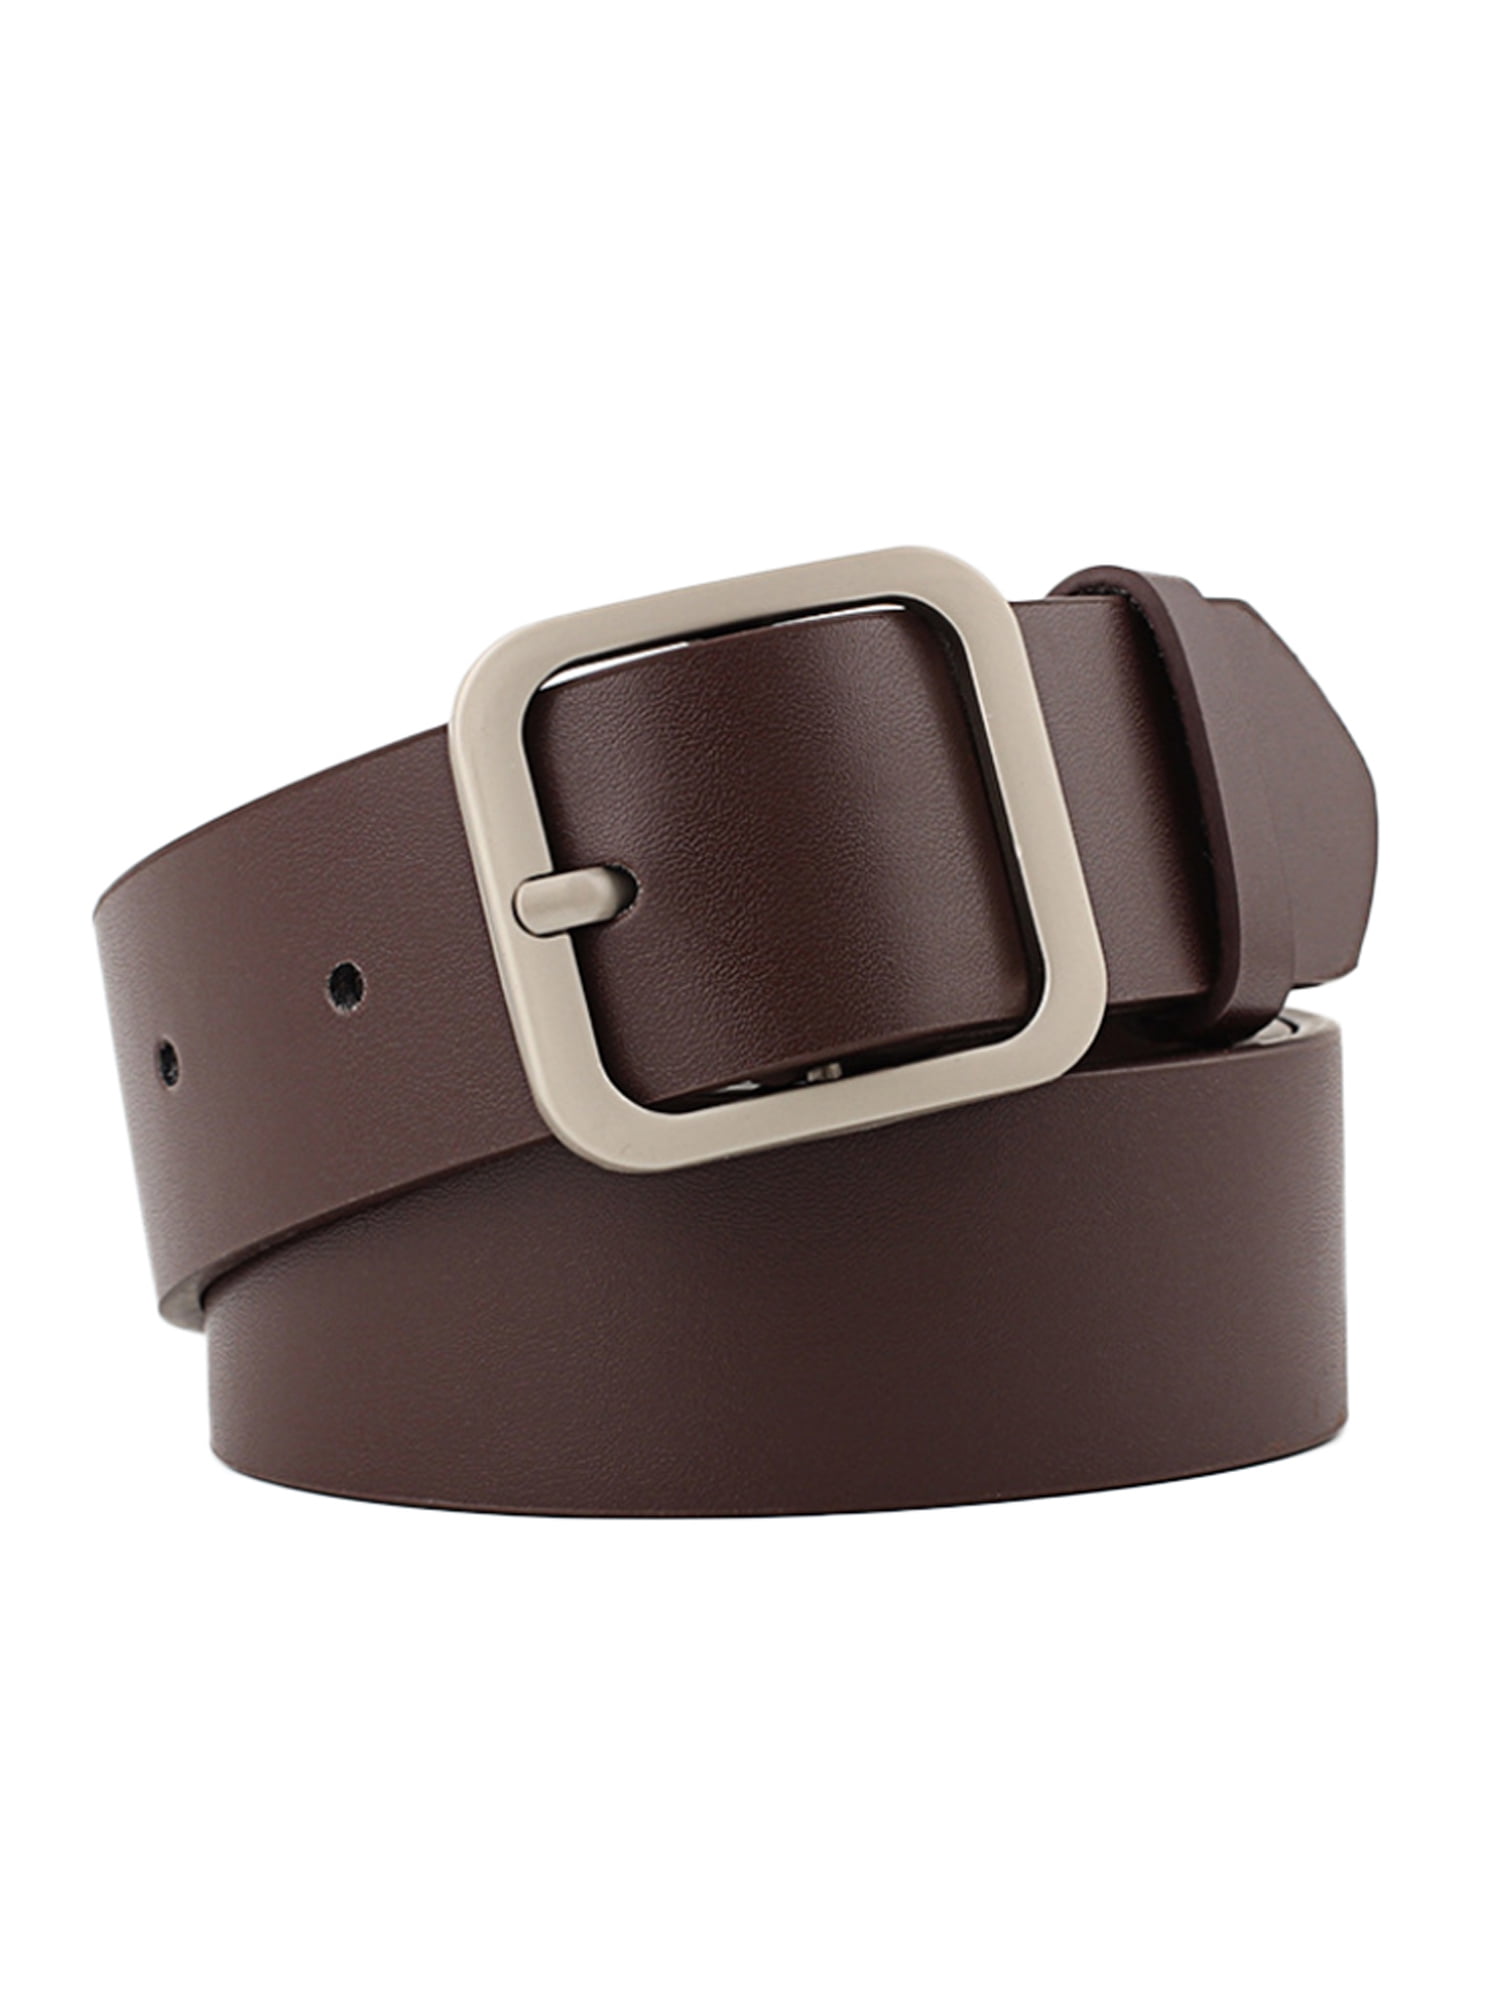 Women Fashion Elastic Dark Brown Faux Suede Leather Belt Square Buckle Size S M 